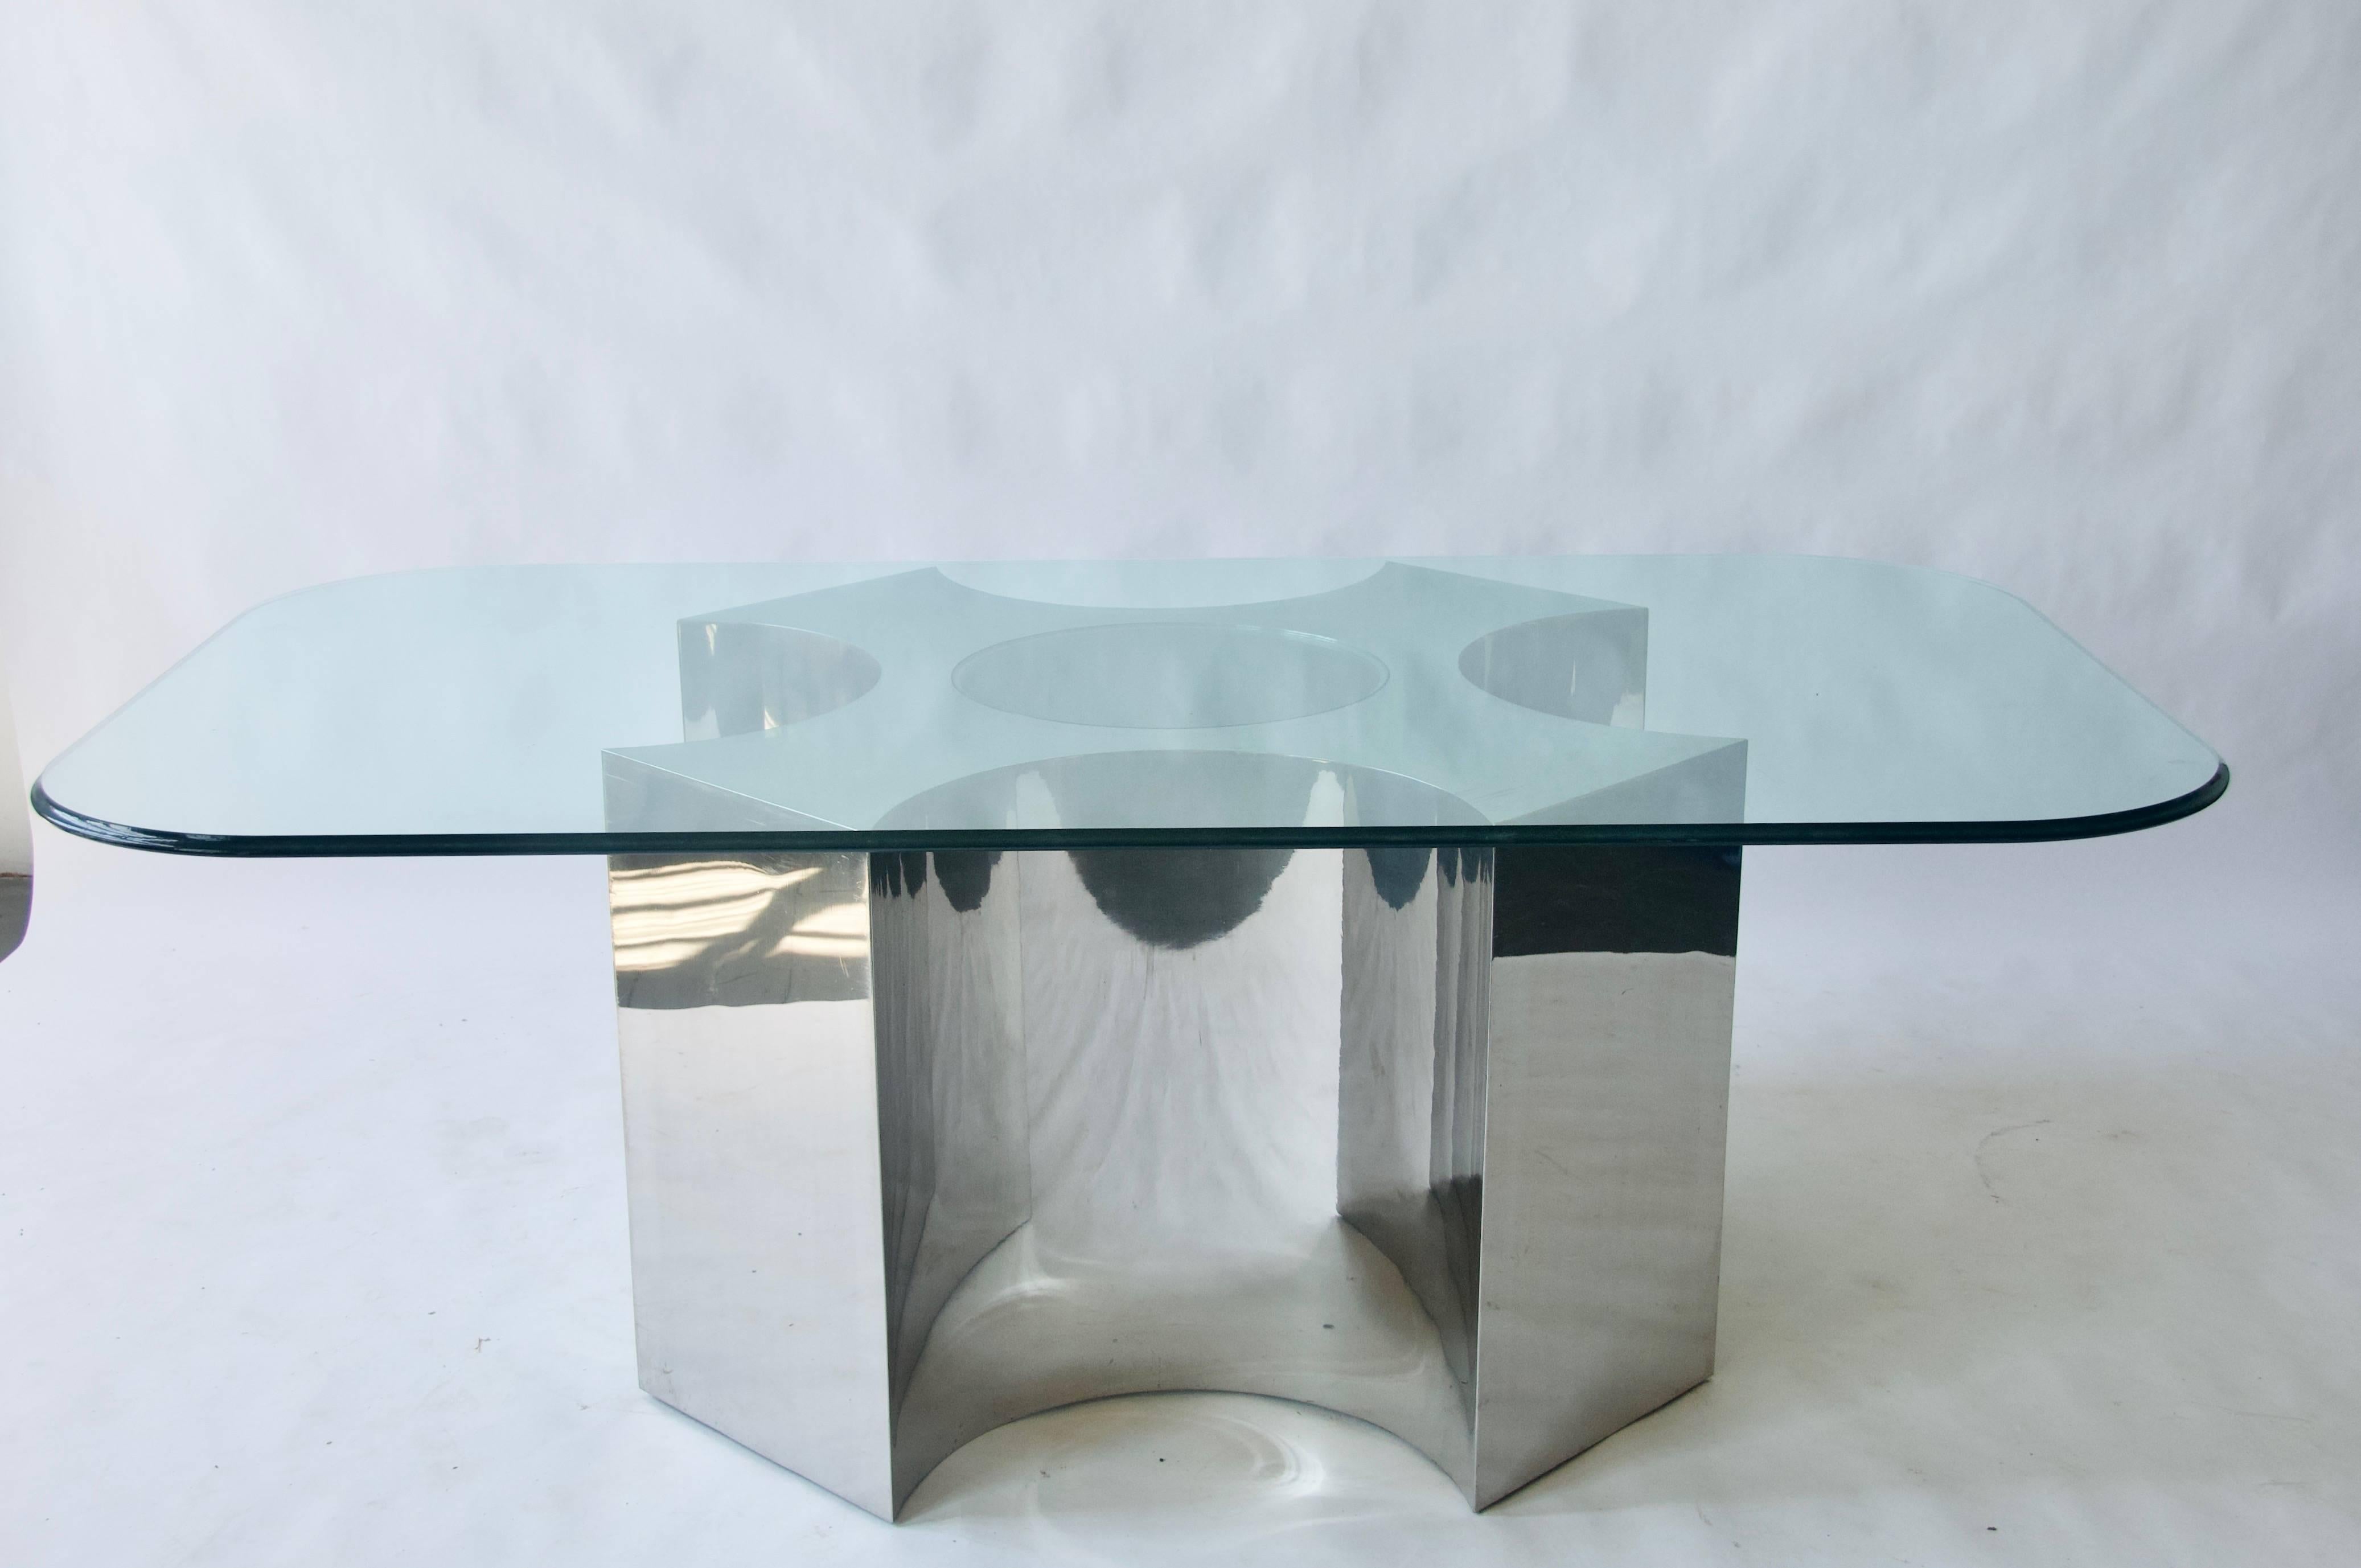 Rare large-scale polished steel table. Polished base has a glass inset on the top. This table base can hold a much a much larger top than the one that is pictured. The glass top pictured measures 48 x 84. 

The glass top is pictured for scale and